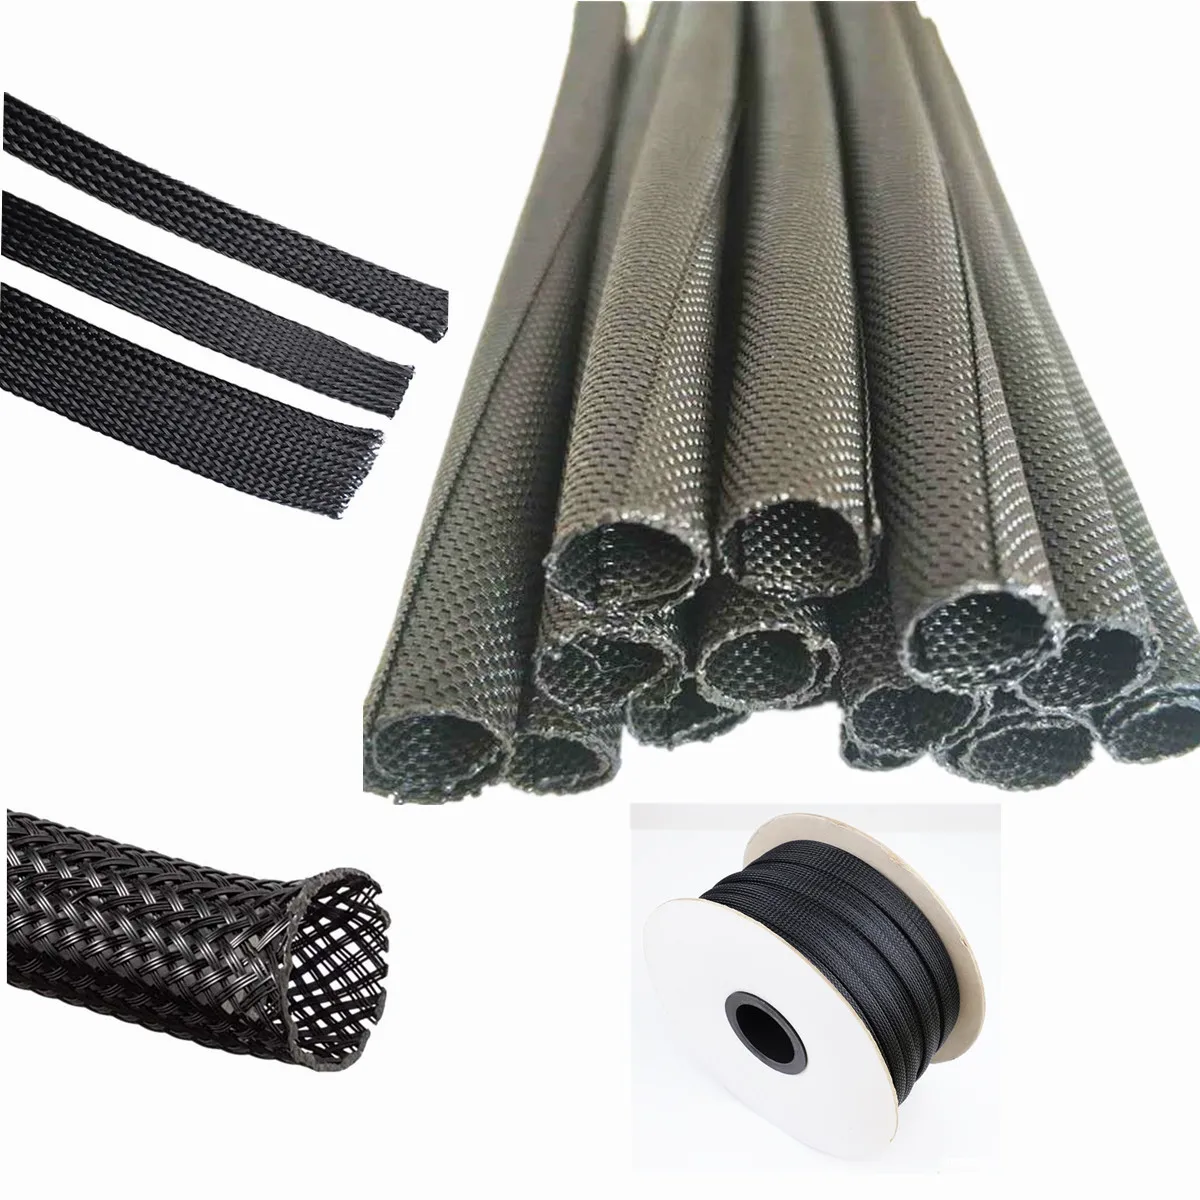 

5M 10M Wholesale Flame-Retardant Nylon Tube Wiring Accessories Insulated Braided Sleeving Data Line Protection Wire Cable